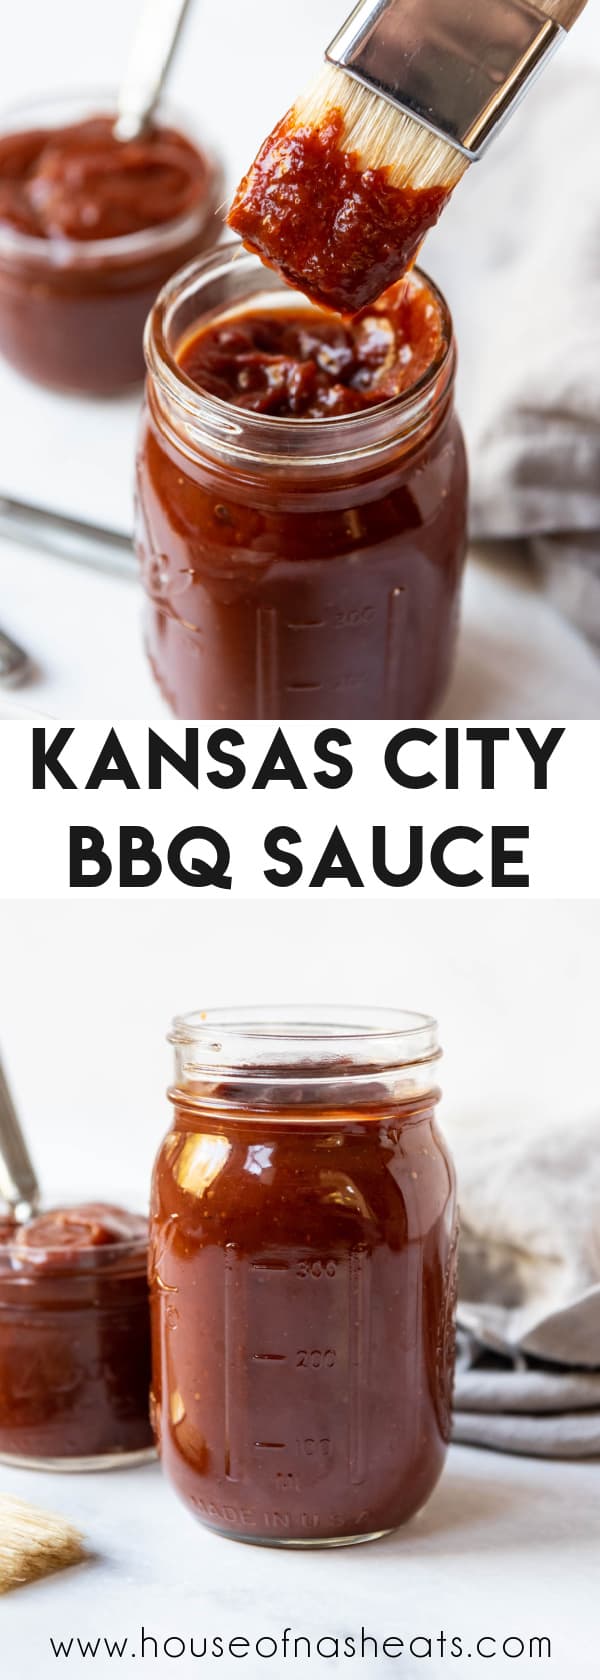 A collage of images of kansas city barbecue sauce with text overlay.